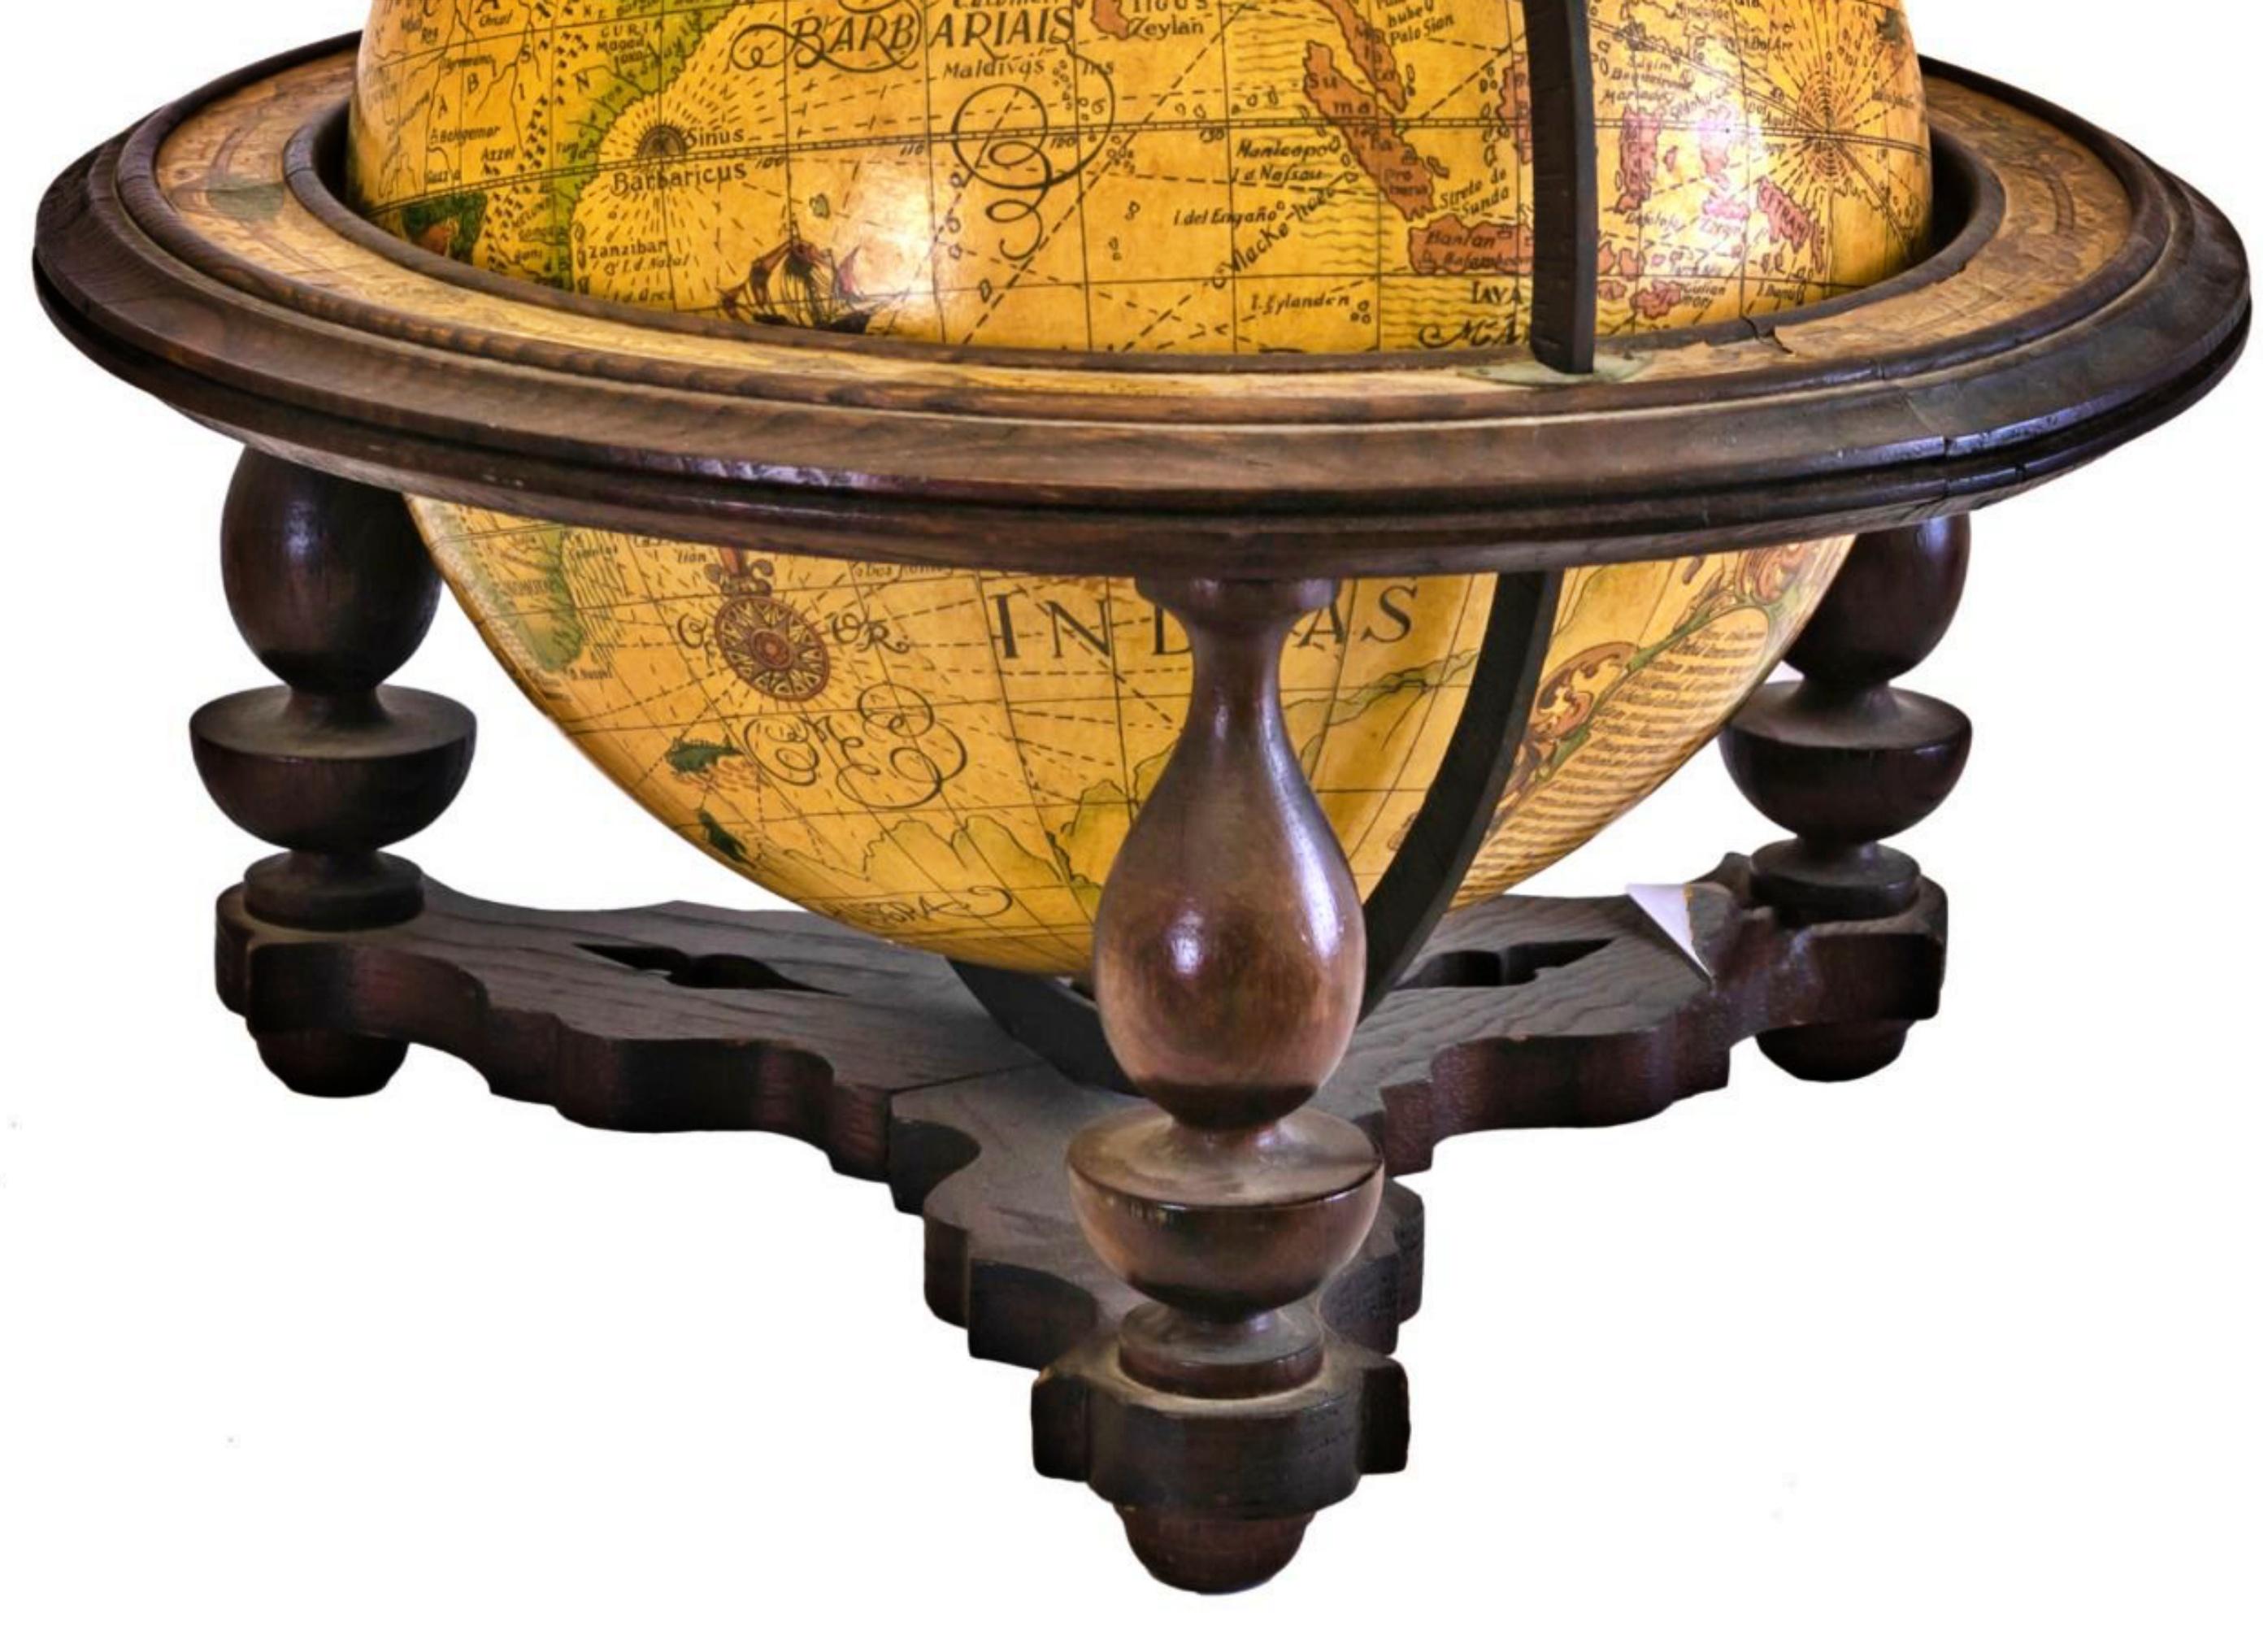 Hand-Crafted Spanish Tabletop Globe with Turned Wood Support, Early 20th Century